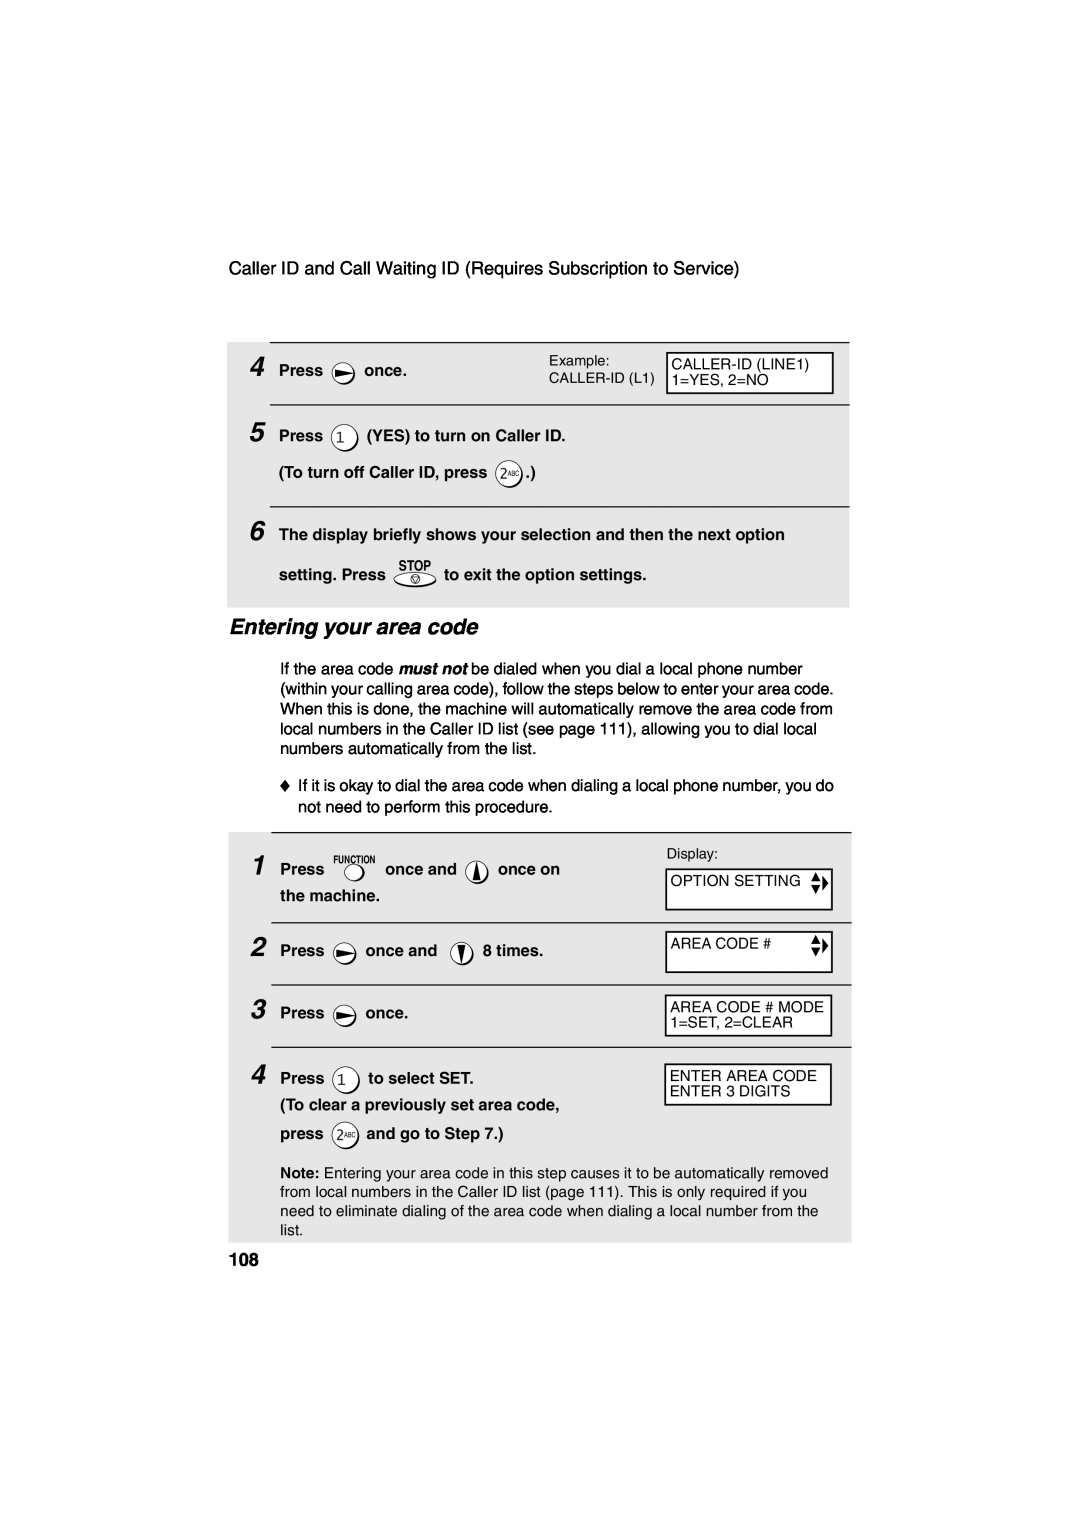 Sharp UX-CD600 operation manual Entering your area code, Caller ID and Call Waiting ID Requires Subscription to Service 